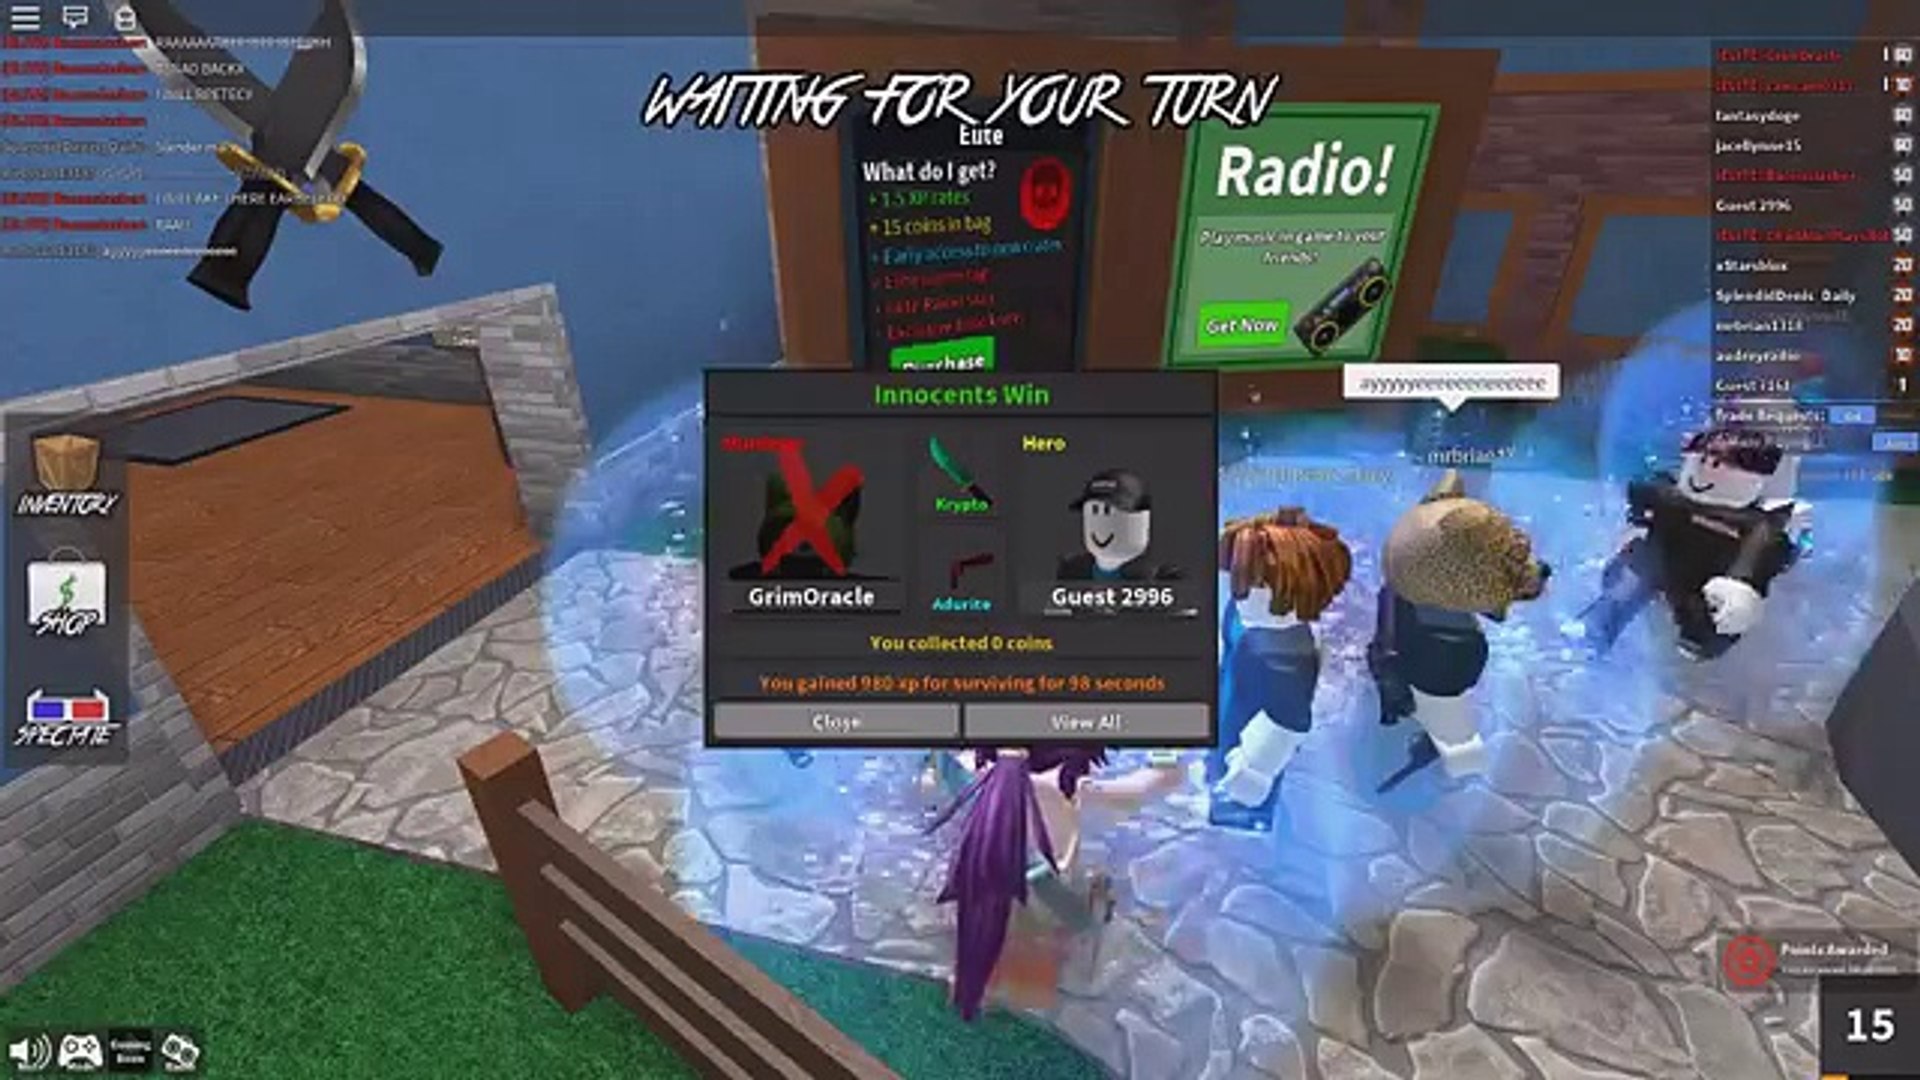 Roblox Lets Play Murder Mystery 2 Radiojh Games Gamer Chad Slg 2020 - code how to get 50 free coins roblox flood escape 2